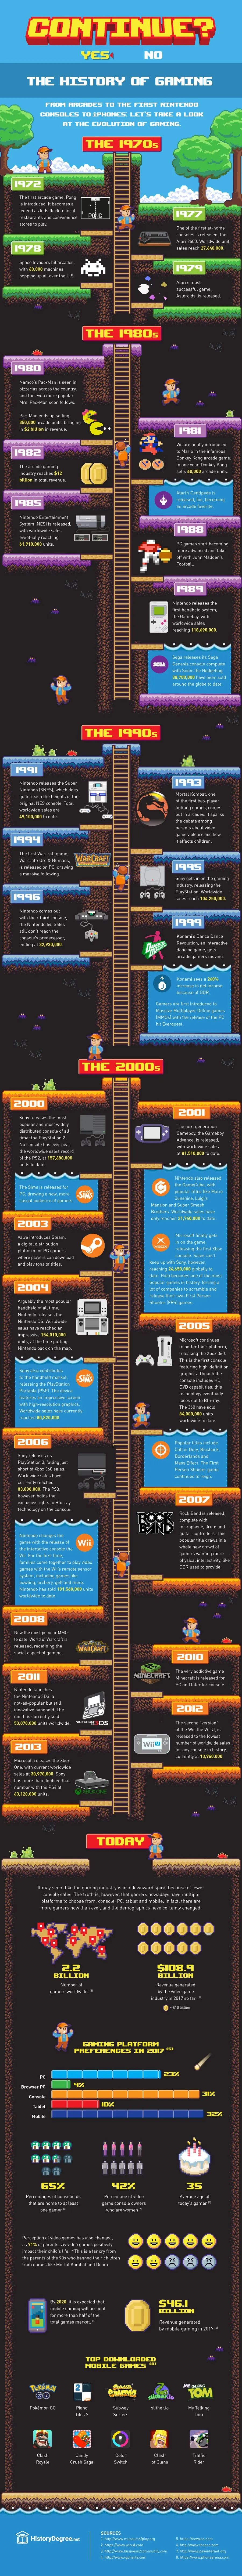 The History of Gaming - #infographic